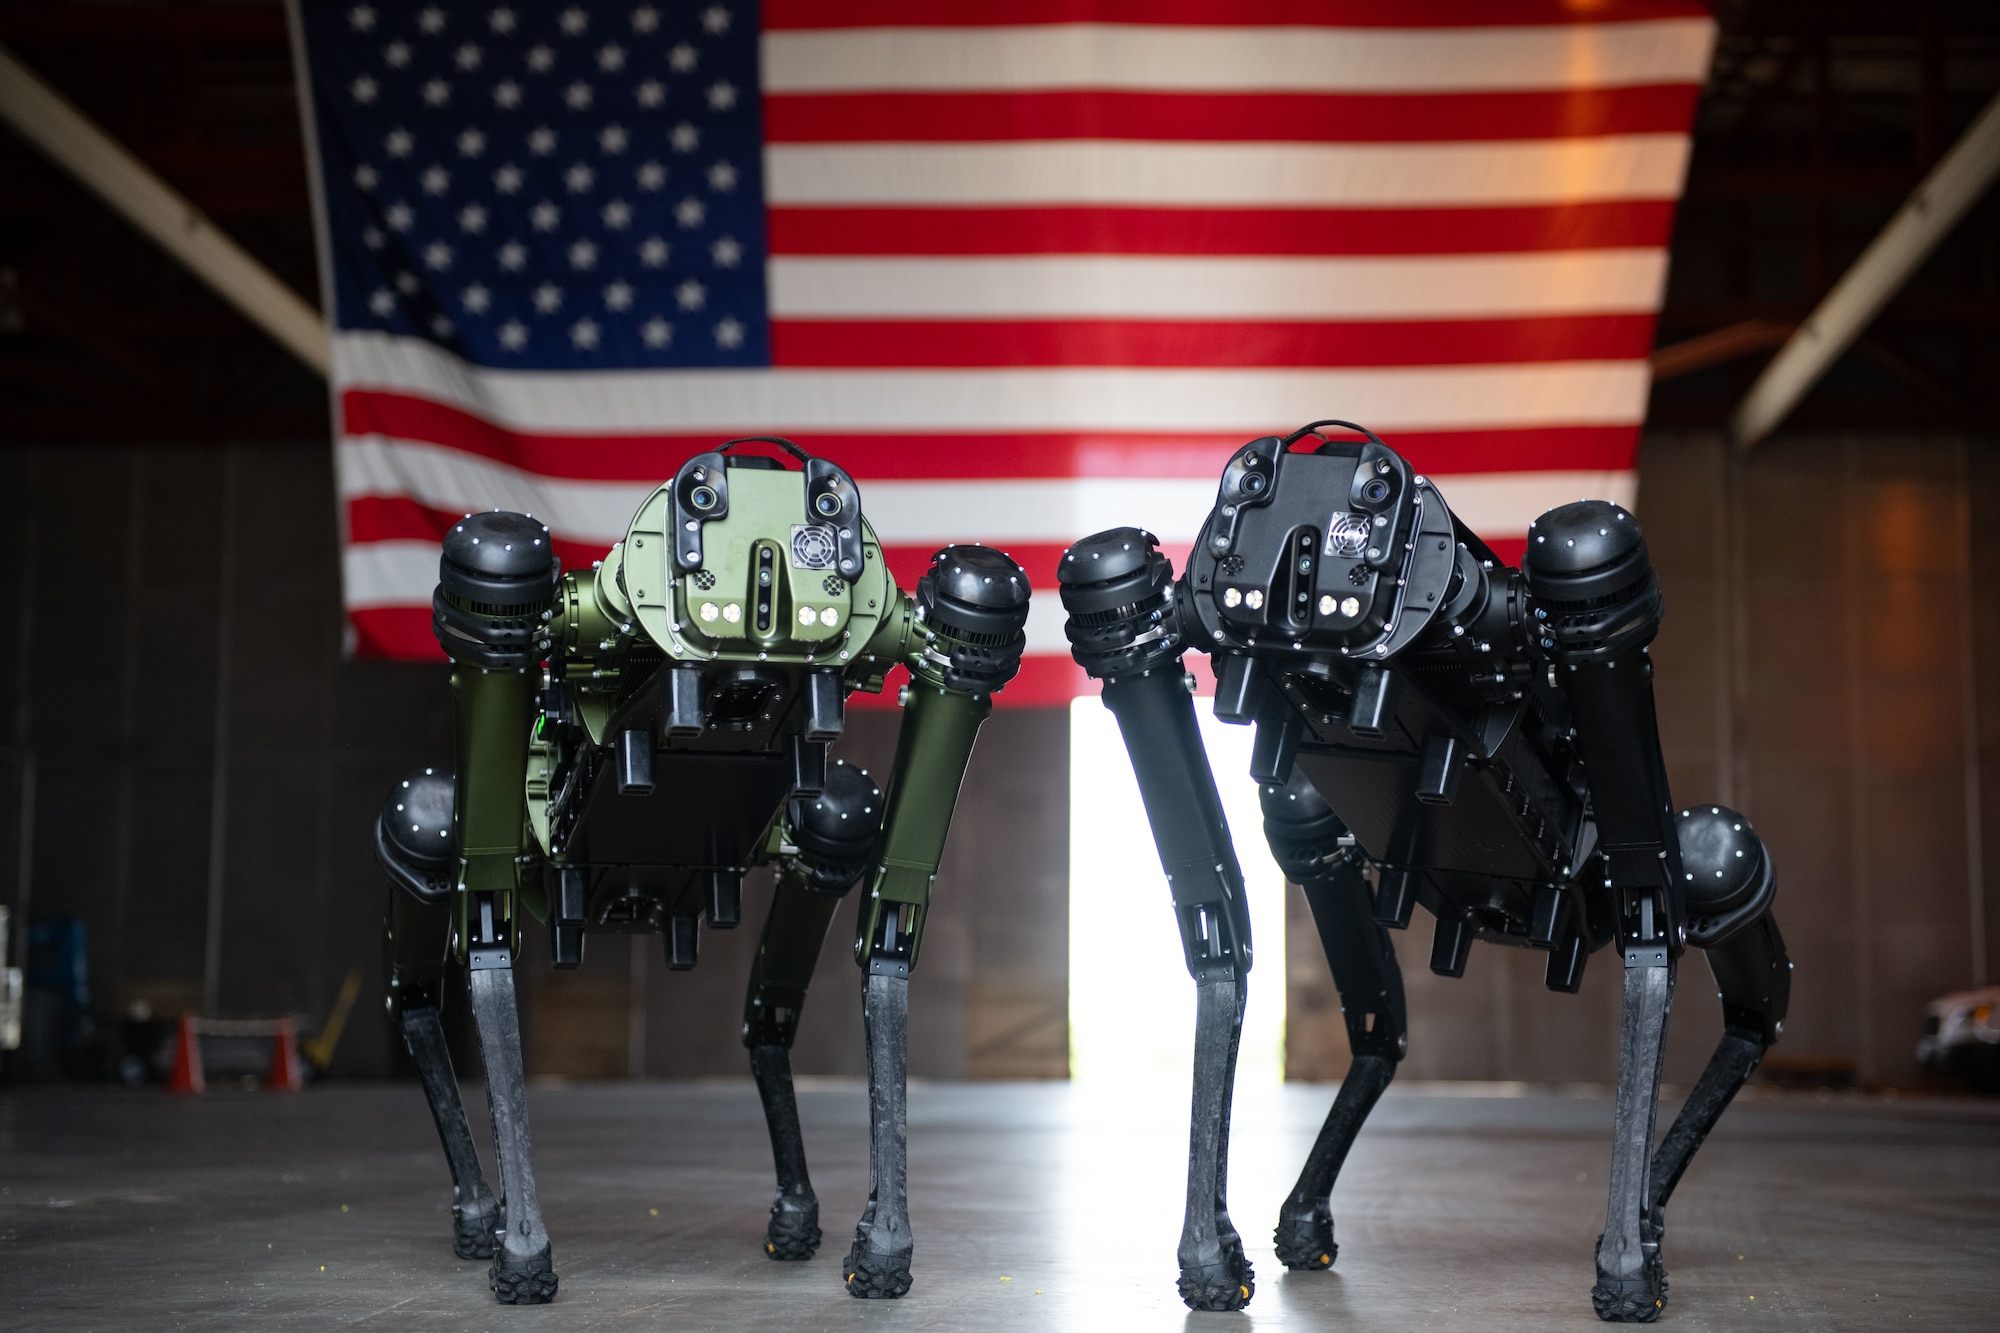 Ghost Robotics Quadruped Unmanned Ground Vehicles (Q-UGV) pose for a photo at Cape Canaveral Space Force Station, Fla., July 27, 2022. The Q-UGV effectively demonstrated how manual and repetitive tasks can be automated using ground-based robots. (U.S. Space Force photo by Senior Airman Samuel Becker)